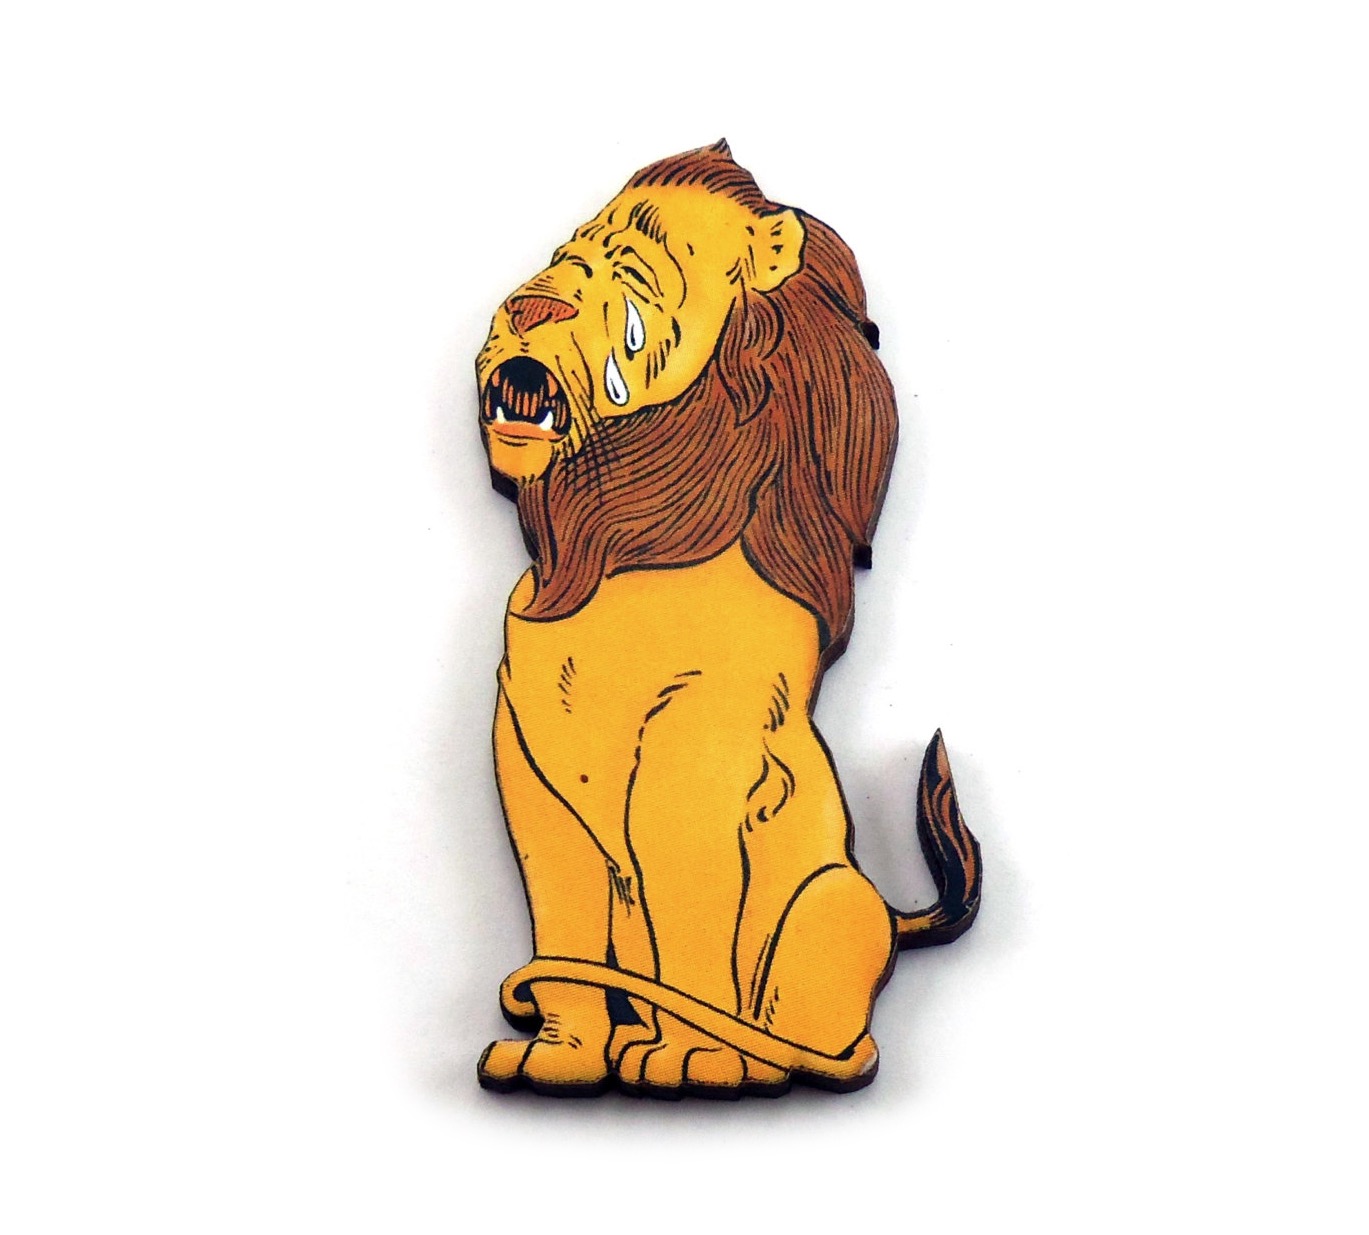 Wizard of Oz Cowardly Lion brooch by Bunnyhornet available on Made It. More #Leo and Lion-inspired products on the RSD Blog.